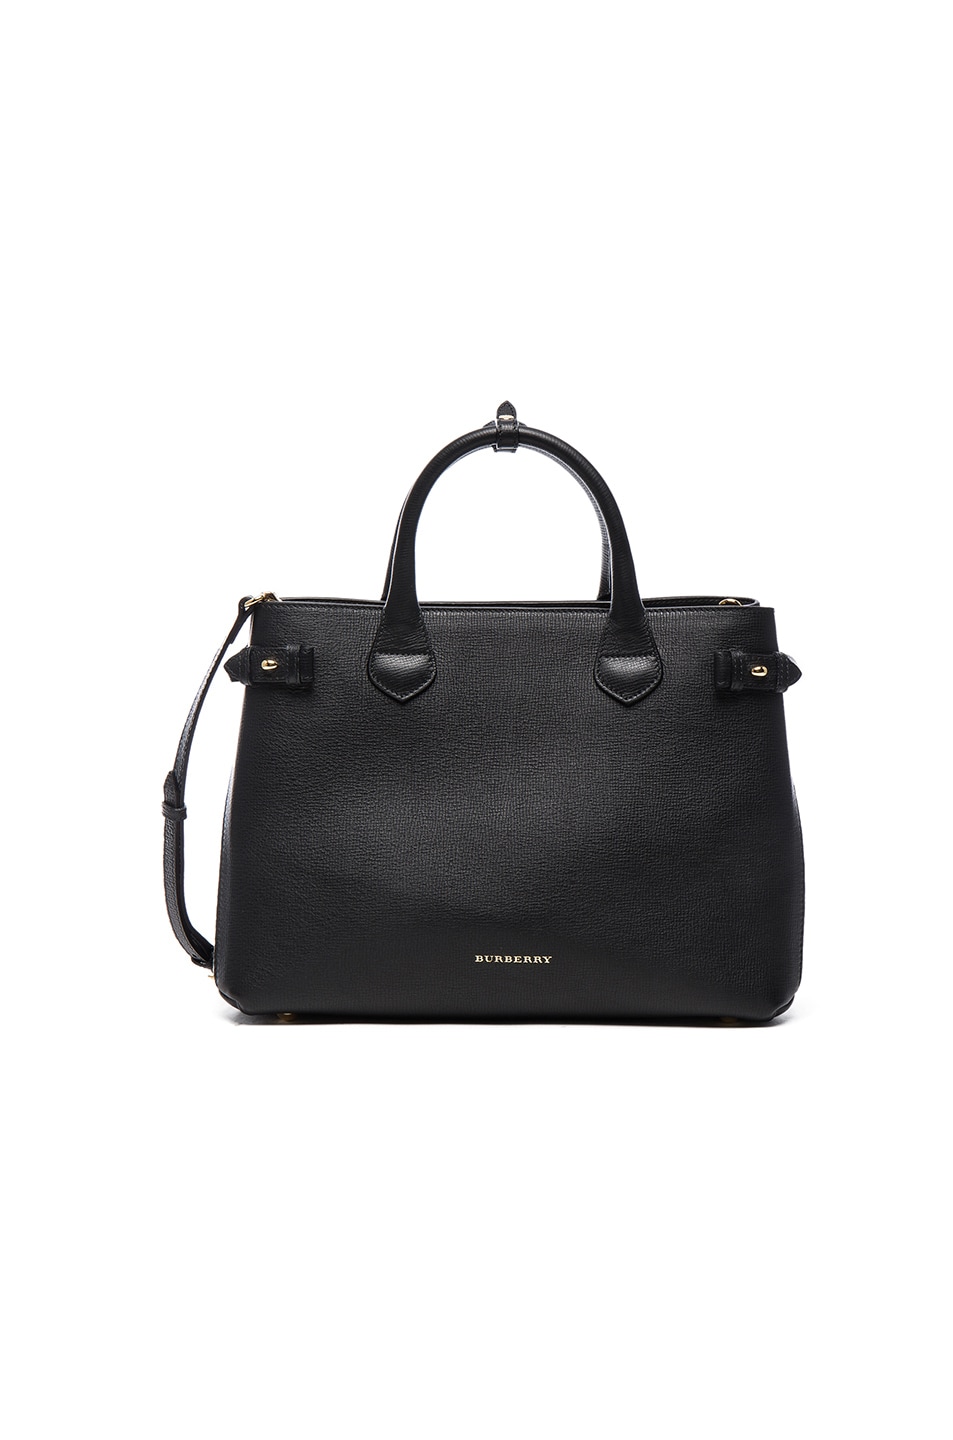 Image 1 of Burberry London Medium Banner Check Leather Bag in Black